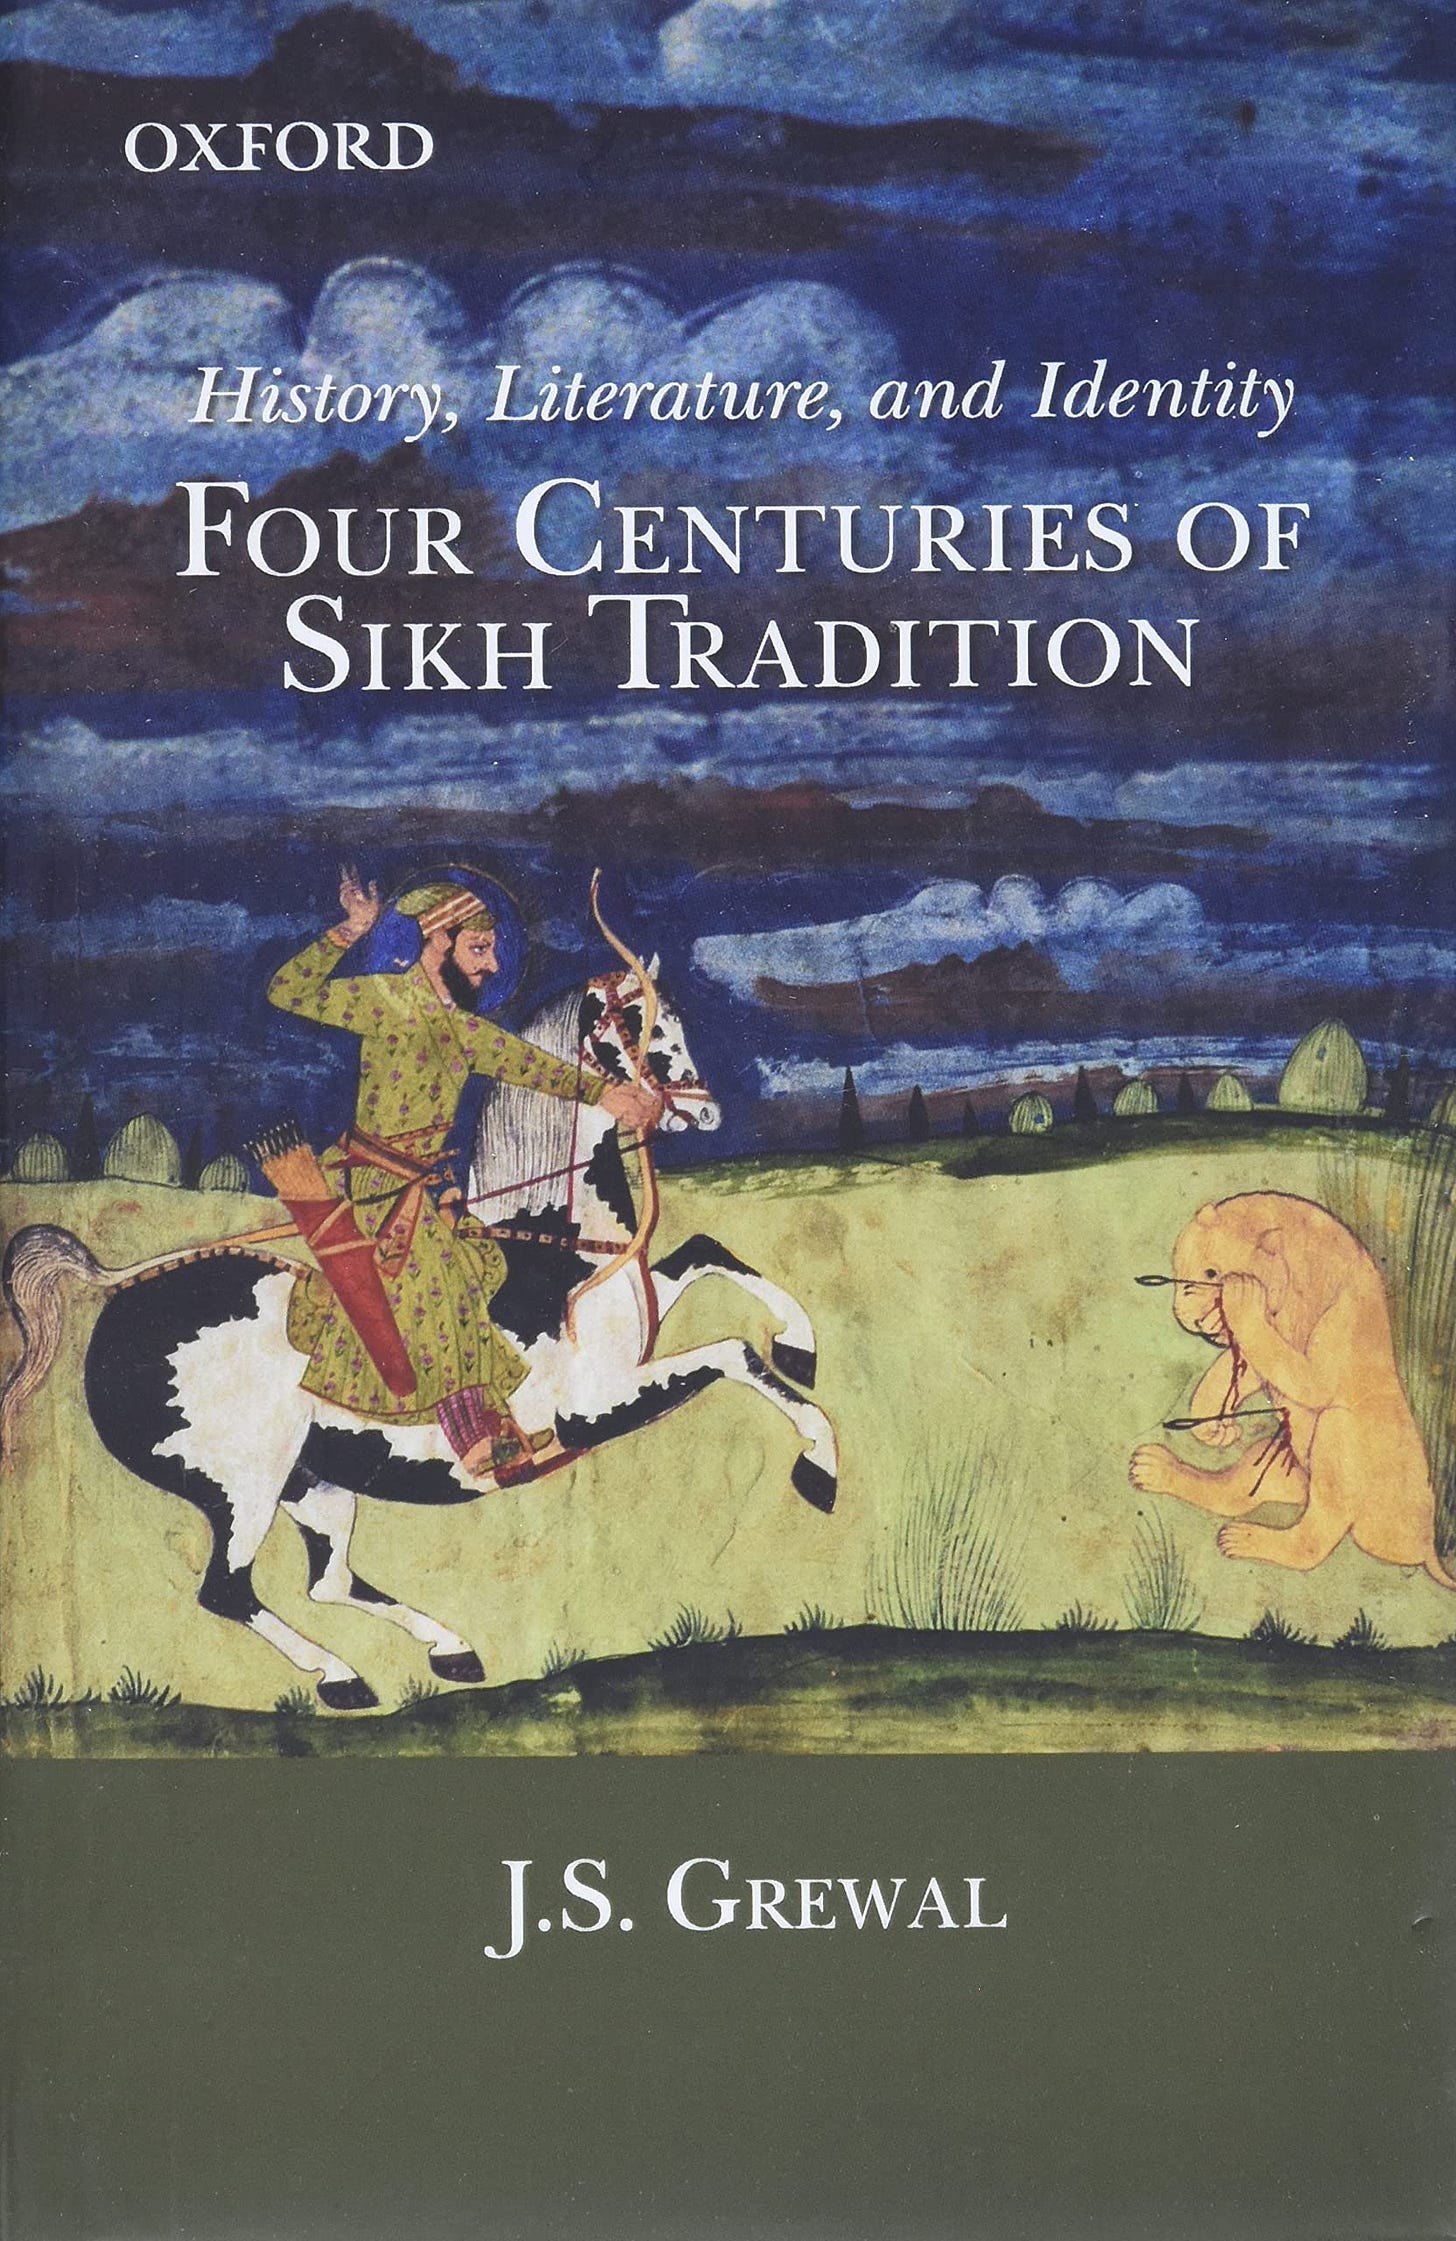 History, Literature, And Identity;: Four Centuries of Sikh Tradition:  Amazon.co.uk: Grewal, J.S.: 9780198070740: Books